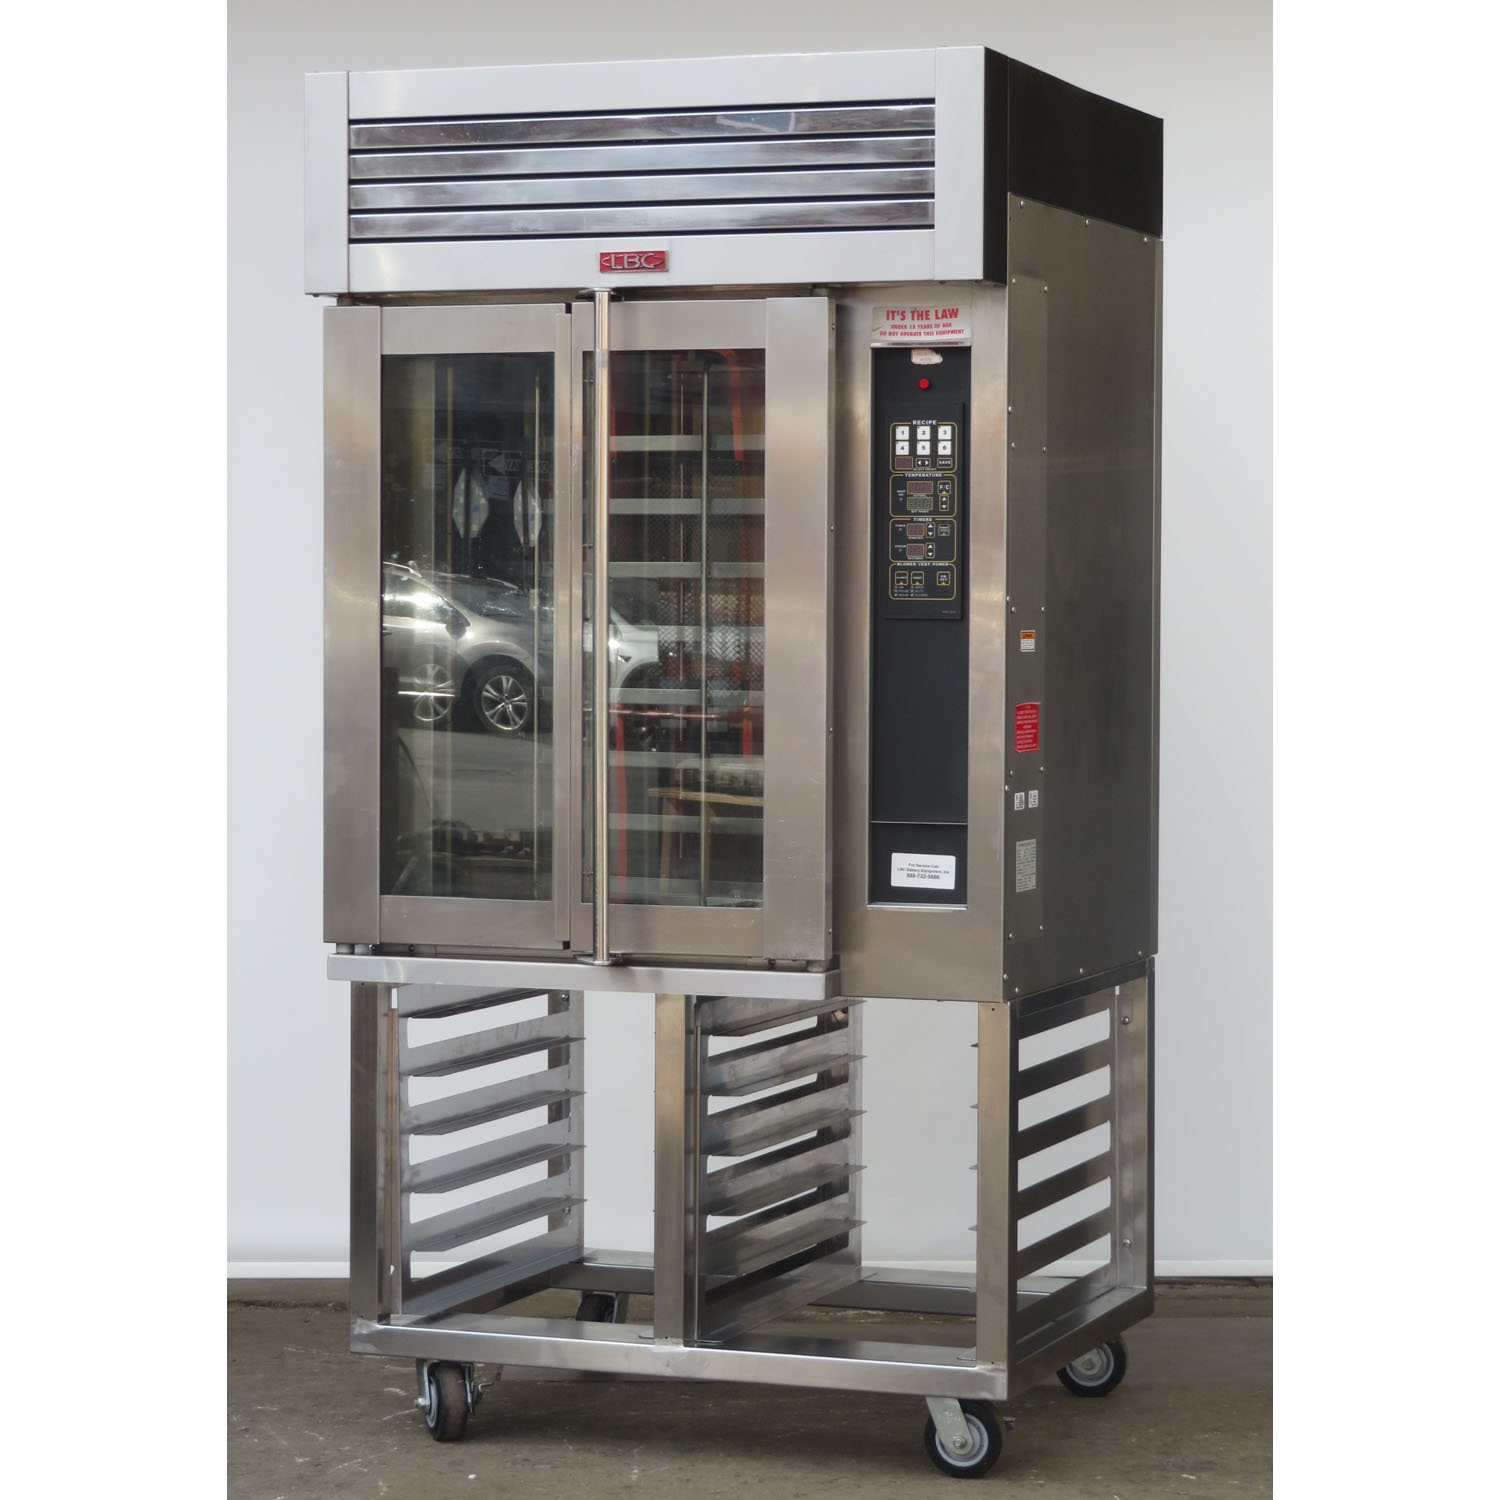 https://www.bakedeco.com/images/large/lbc_lmo-e8_electric_mini_rack_oven_with_proofer_us_63530.JPG